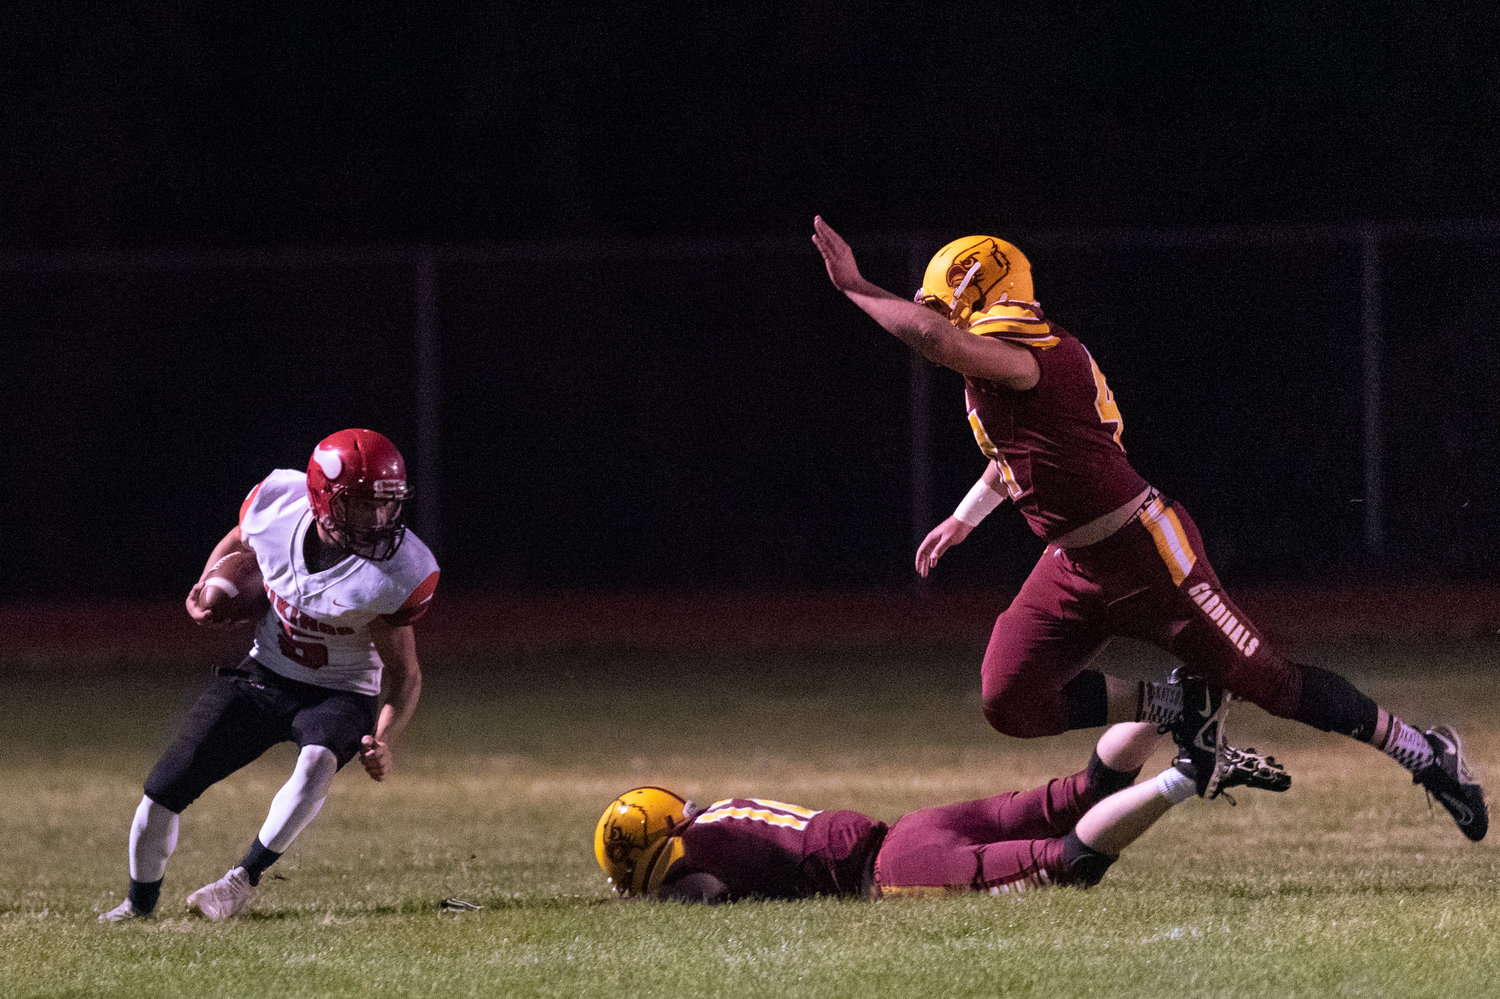 Mossyrock's Keegan Kolb (left) ducks out of the way of Winlock's Nolan Swofford (right) in the Cardinals 42-40 win Oct. 8.